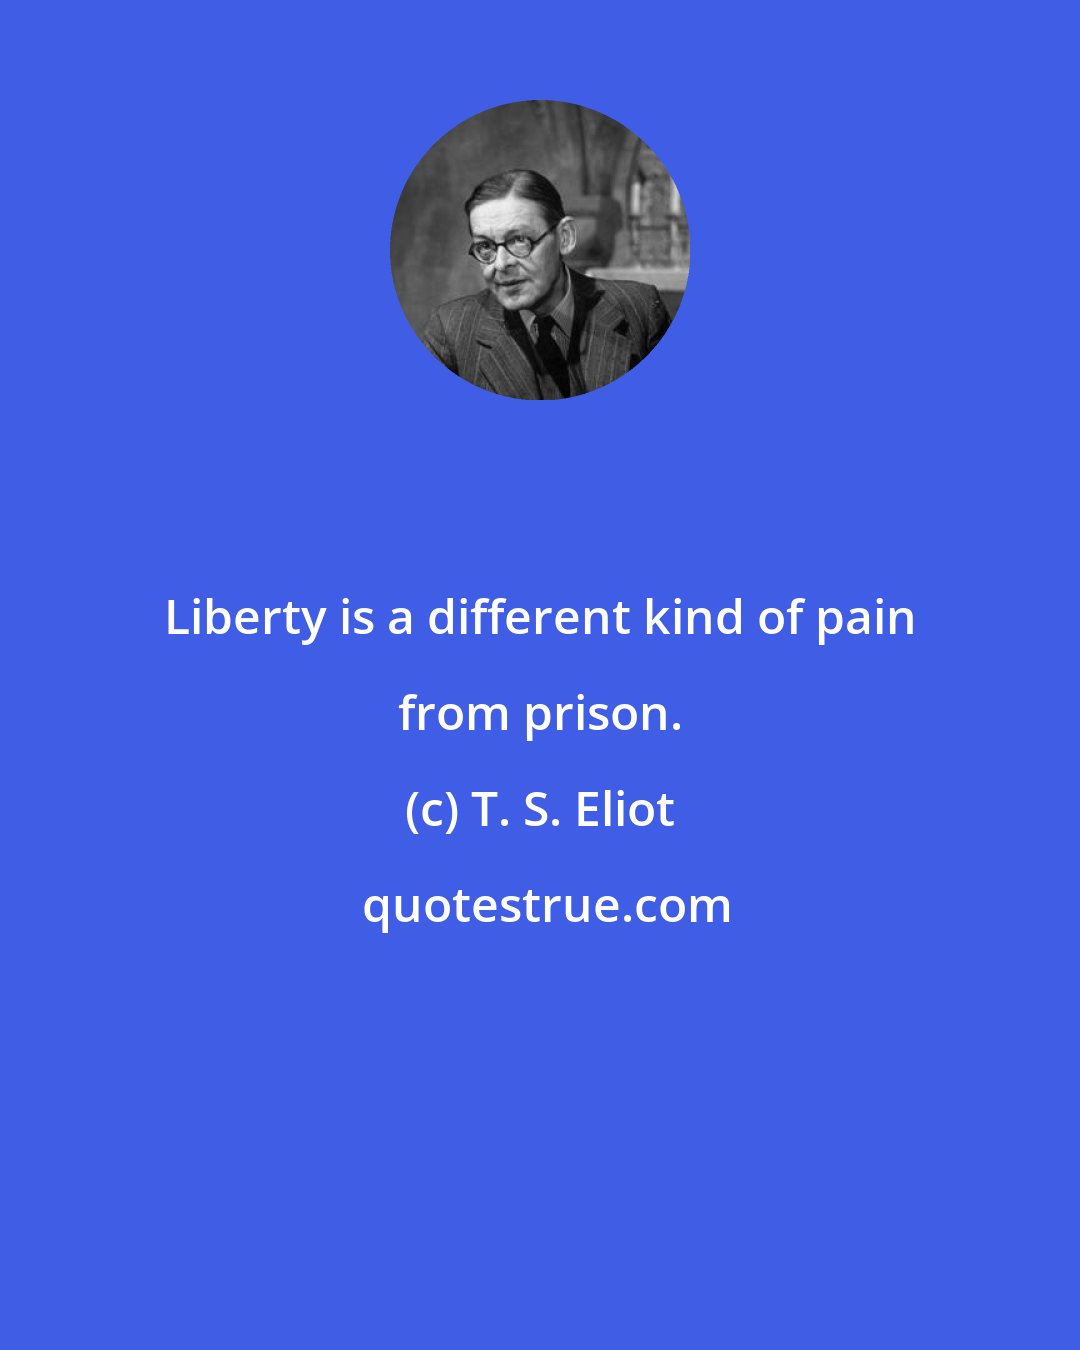 T. S. Eliot: Liberty is a different kind of pain from prison.